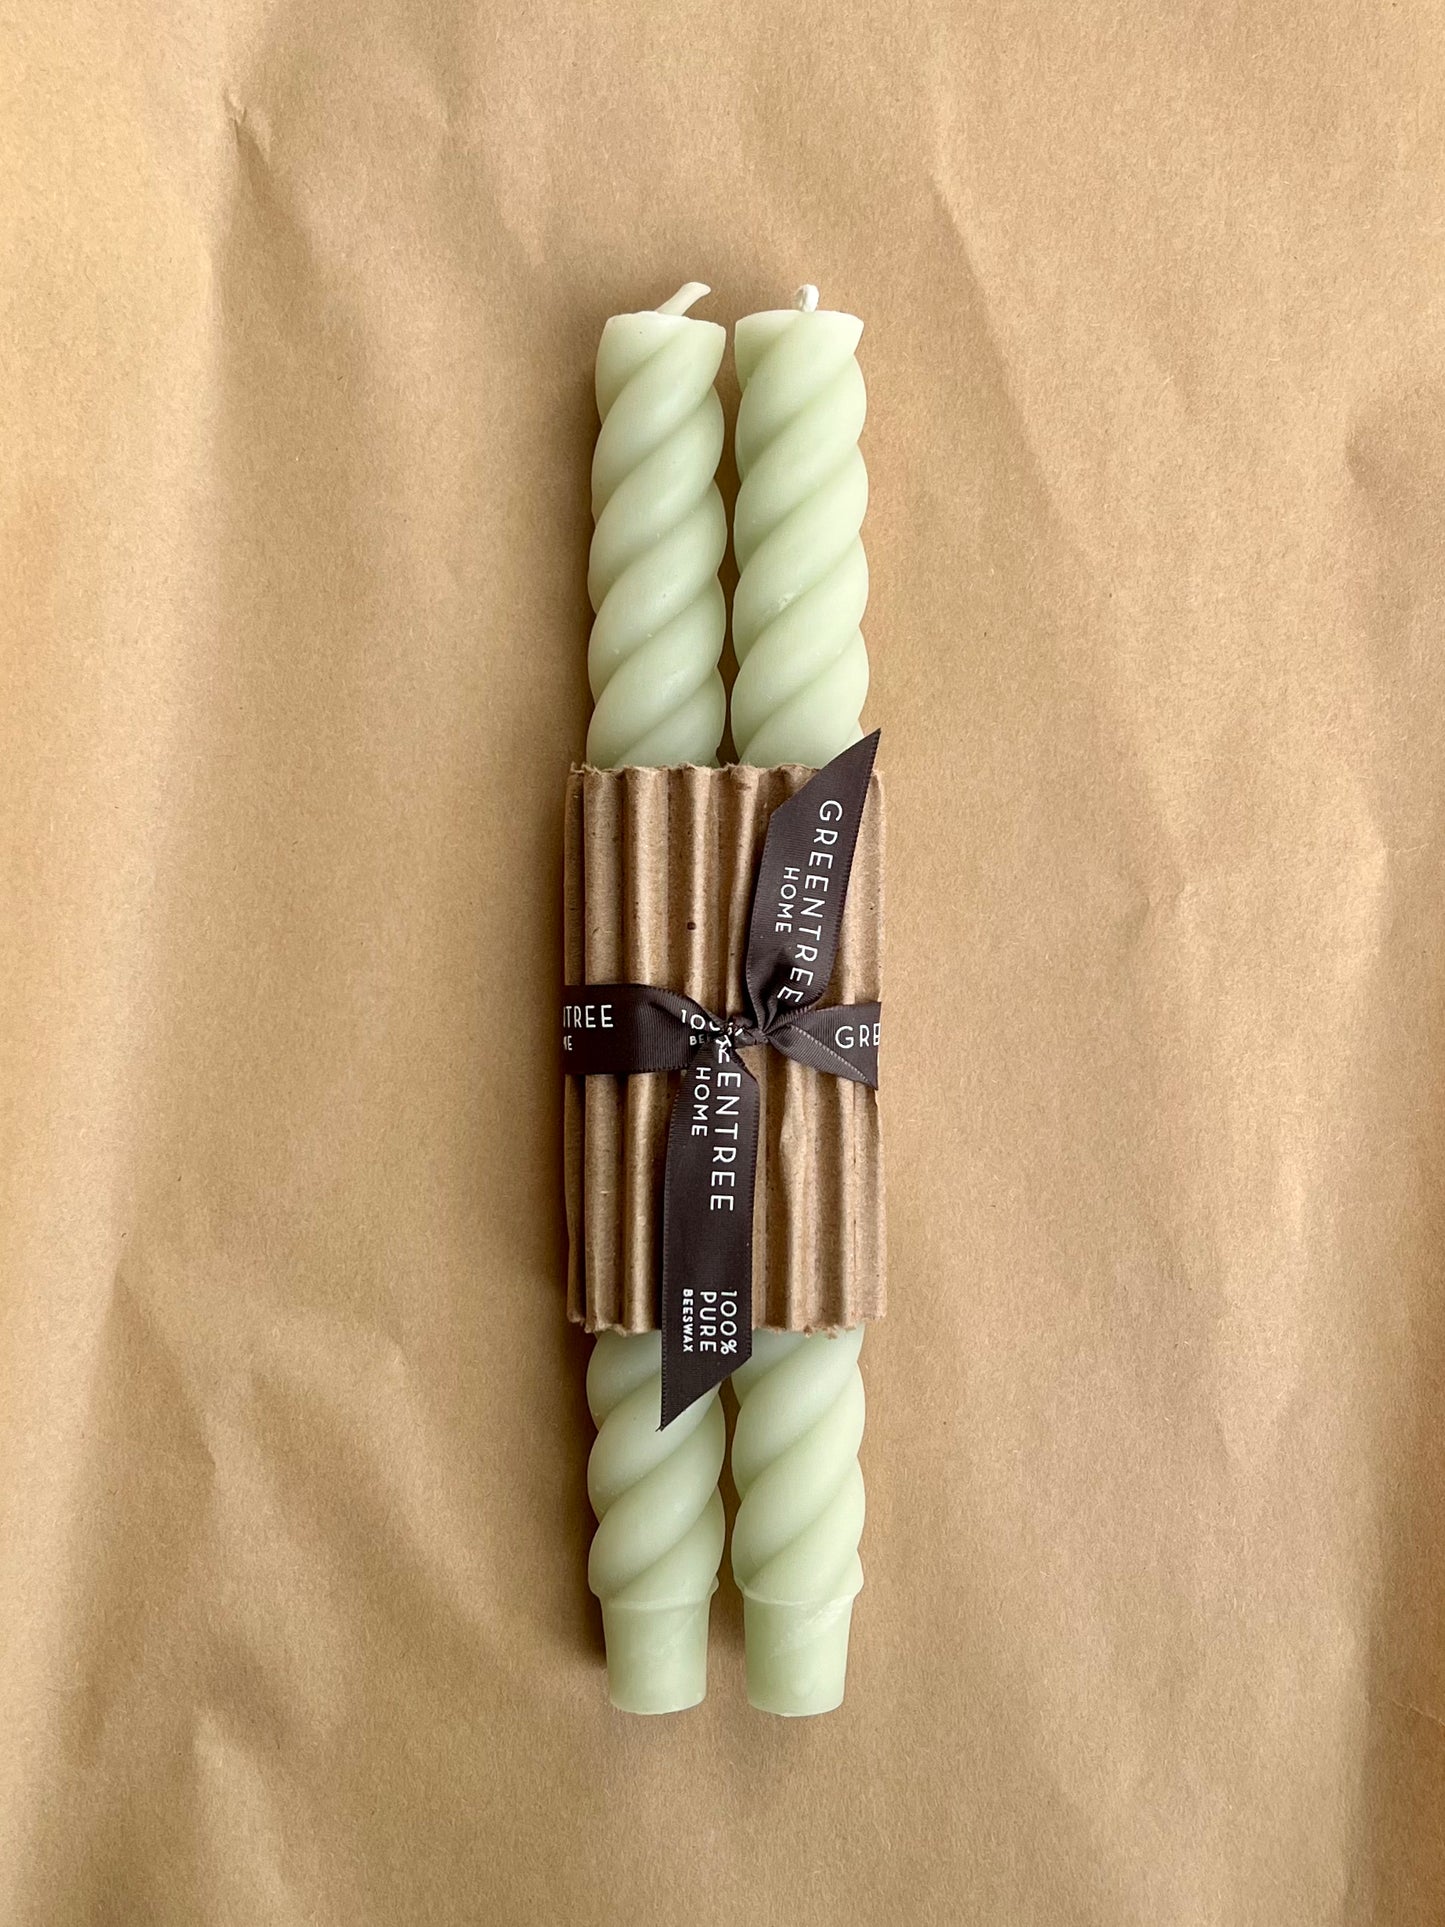 greentree home candle / An elegant and playful twist on the classic taper. Set of 2, 100% pure North American beeswax candles. Each candle is hand poured and individually finished in New York State. celadon